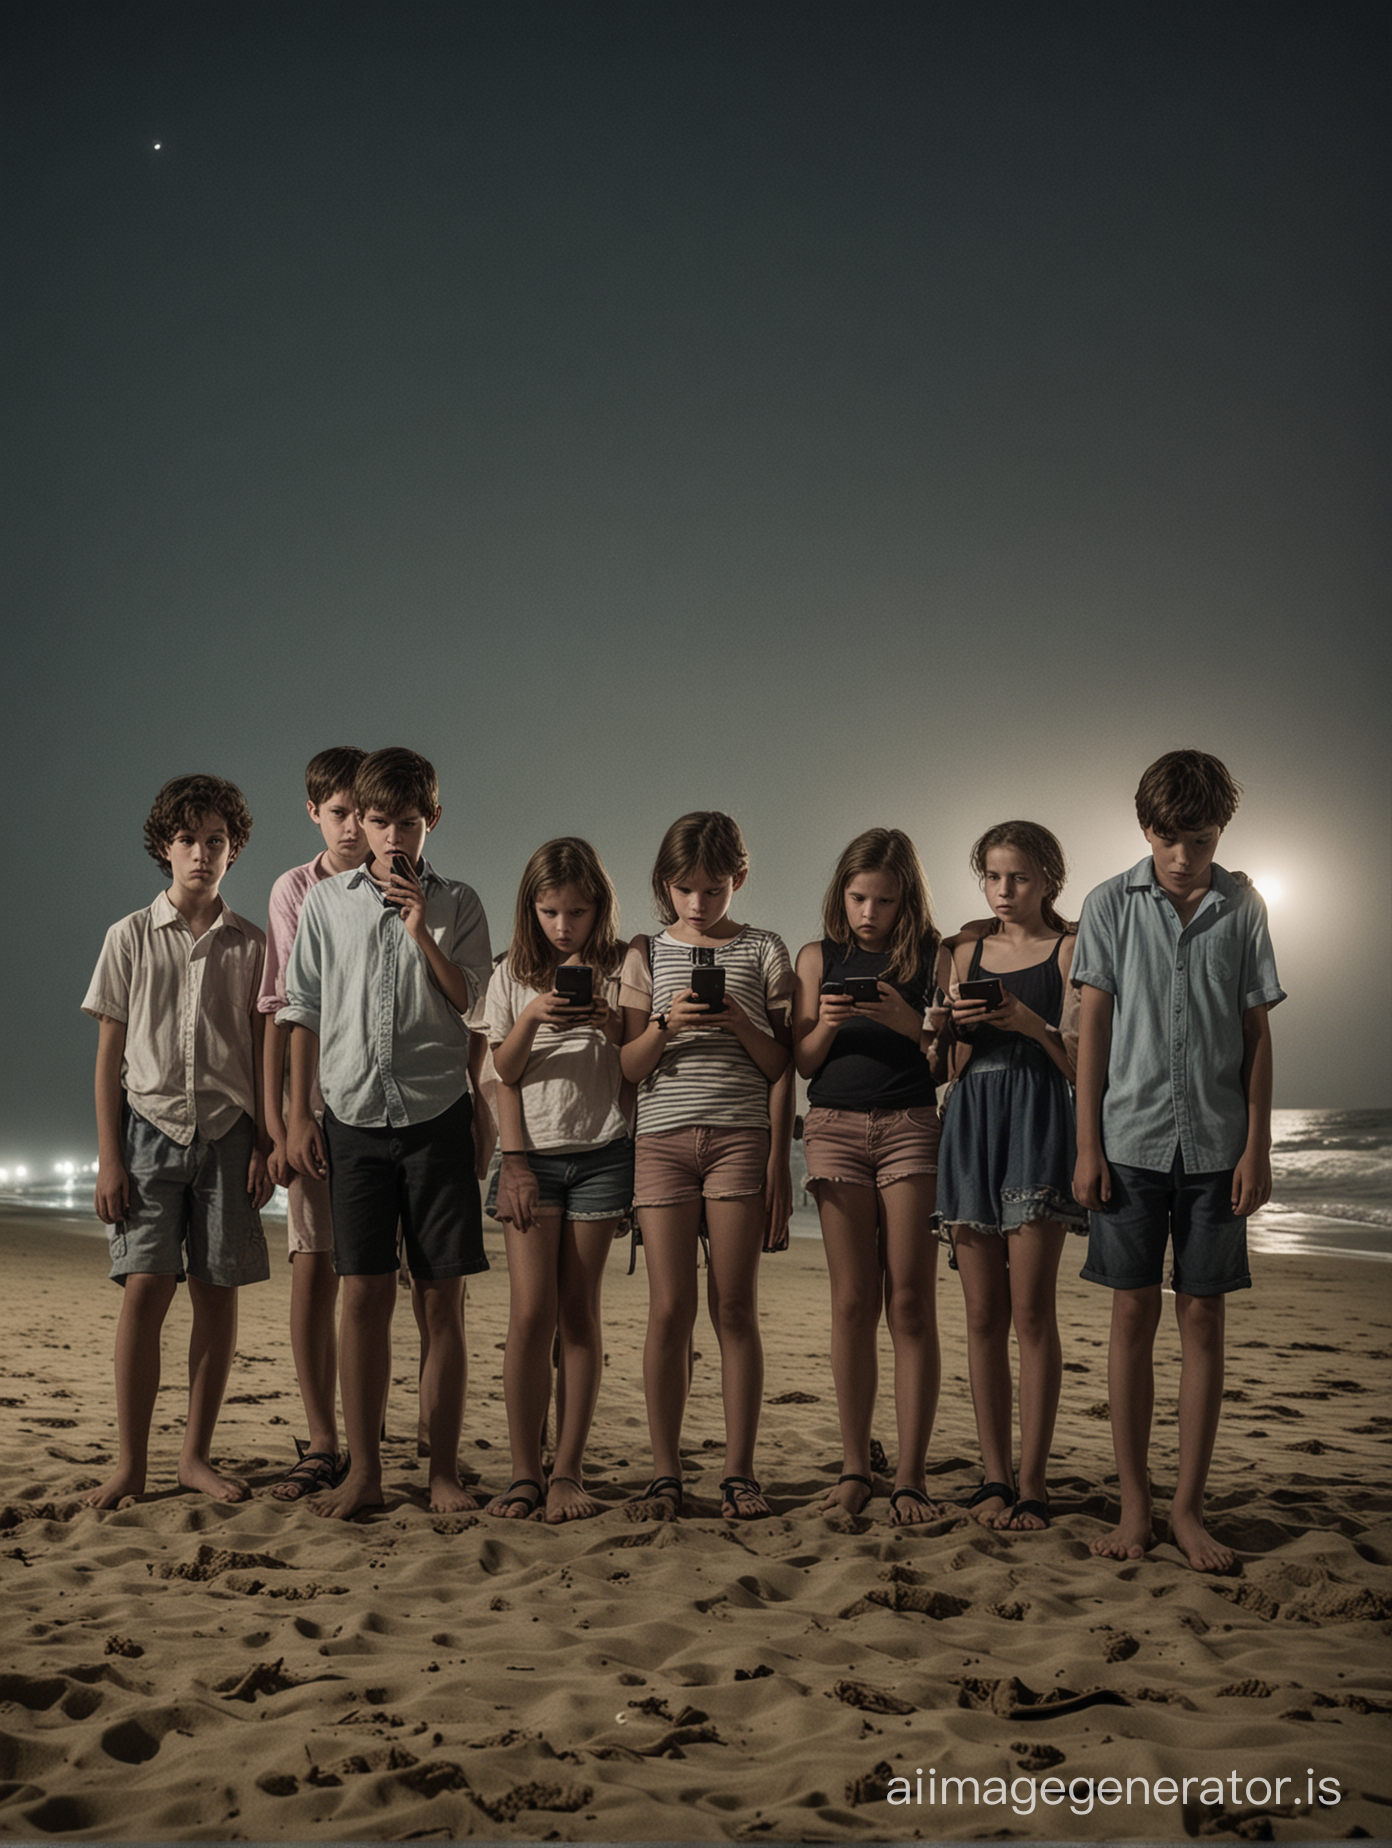 An eerie full body scary cinematic night photograph from a horror movie poster taken from a mid-distance at night, a bunch of ten-year-olds, 3 boys and 4 girls, facing the camera, dressed up casually, as young adults on a beach day, some of them looking at their cellphones, gathered close together in fear.